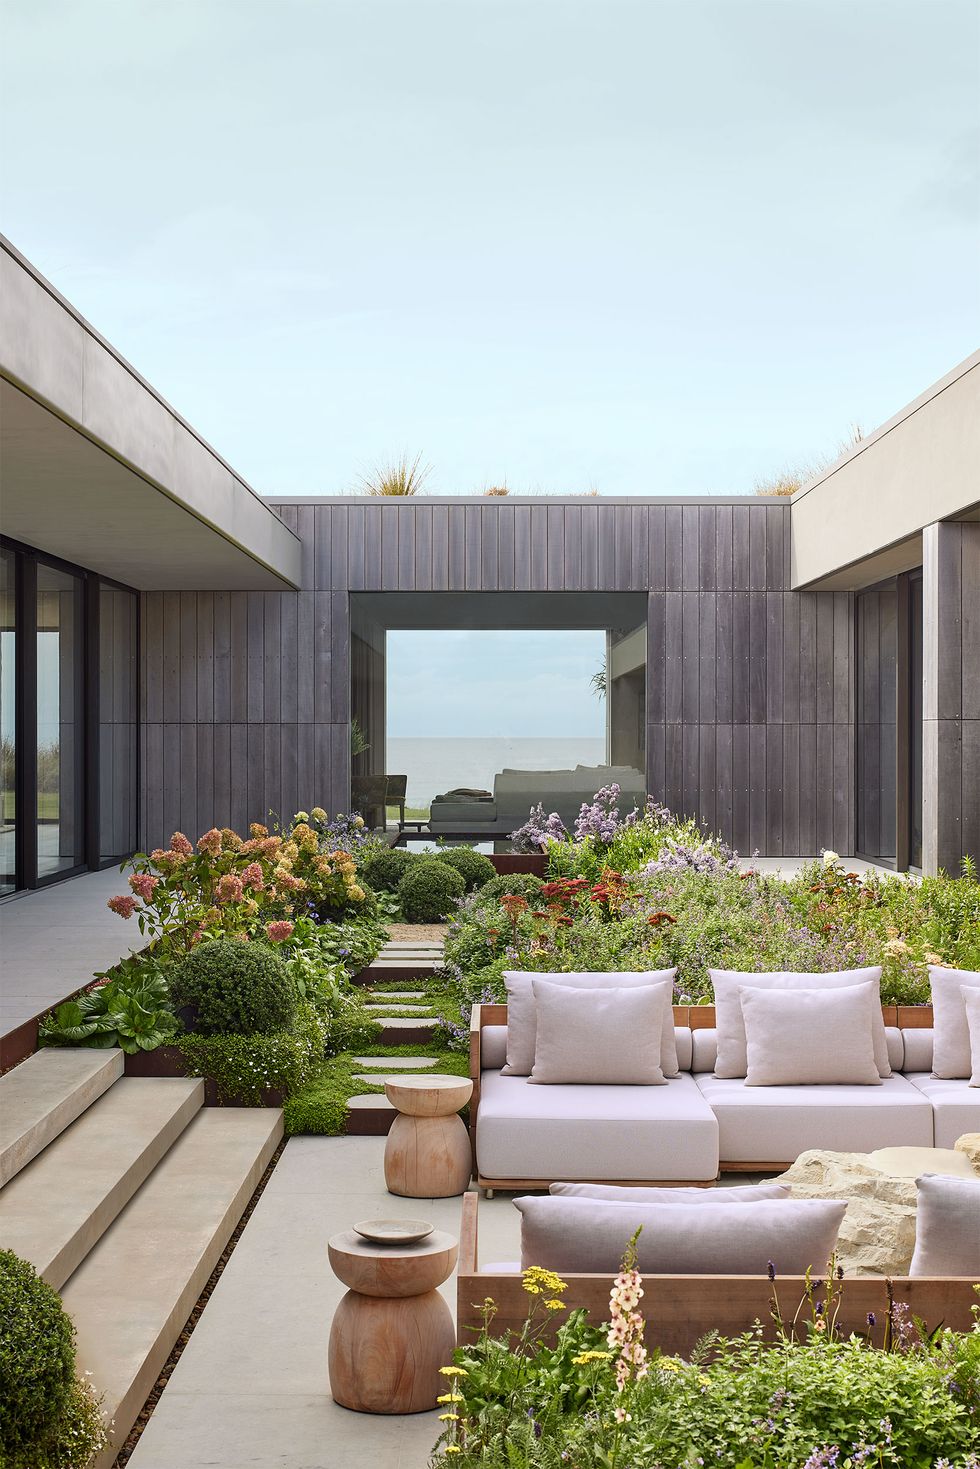 A patio framed in gray wood with opposing wooden sofas with white cushions, two circular wooden tables, steps leading inside and to a garden area with shrubs and flowers, and a large window overlooking the sea.